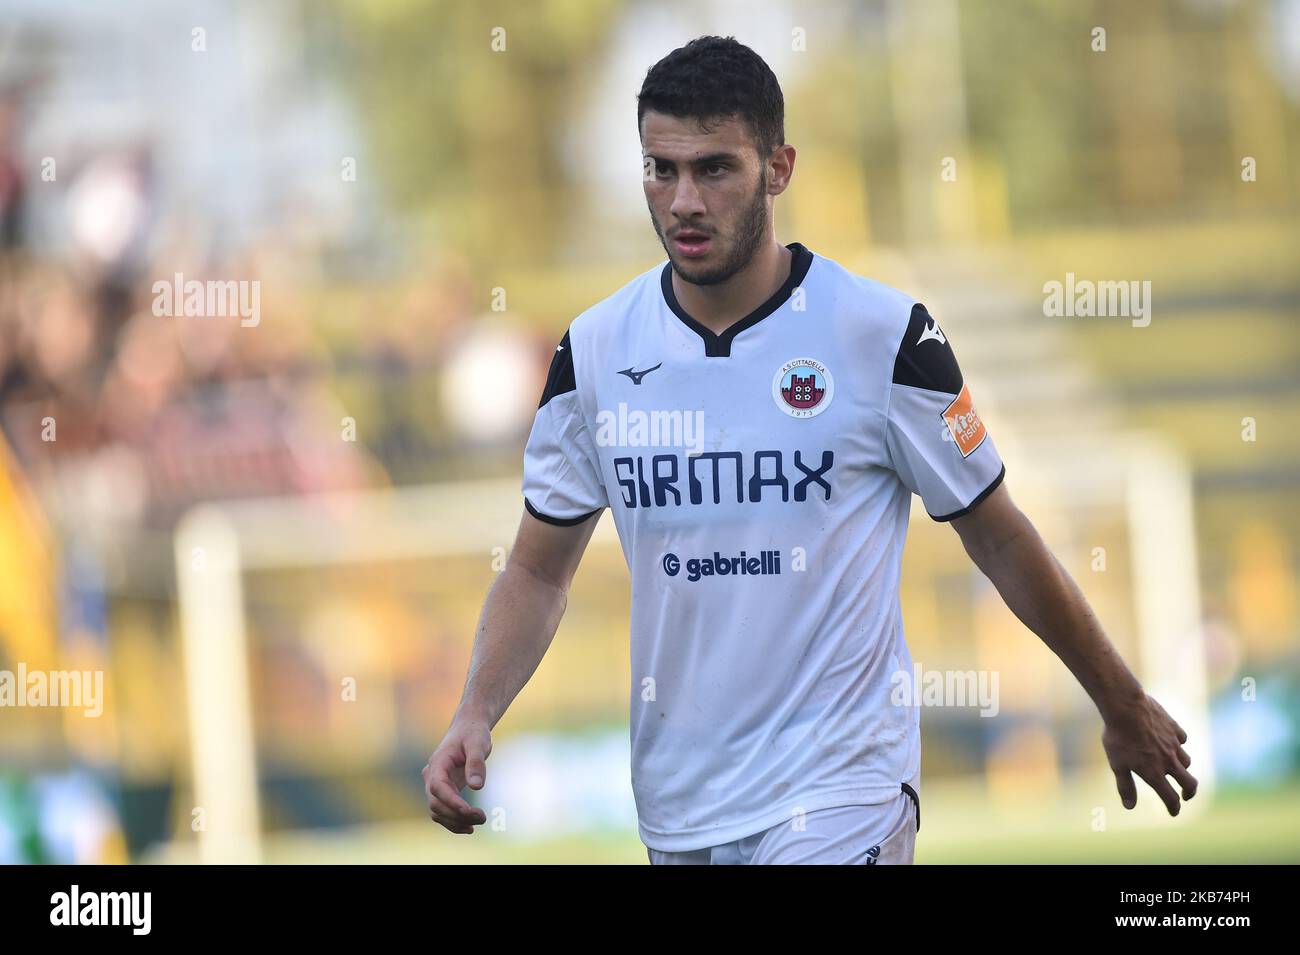 Christian Mora of AS Cittadella during the Serie B match between Juve Stabia and AS Cittadella at Stadio Romeo Menti Castellammare di Stabia Italy on 28 September 2019. (Photo Franco Romano) Stock Photo